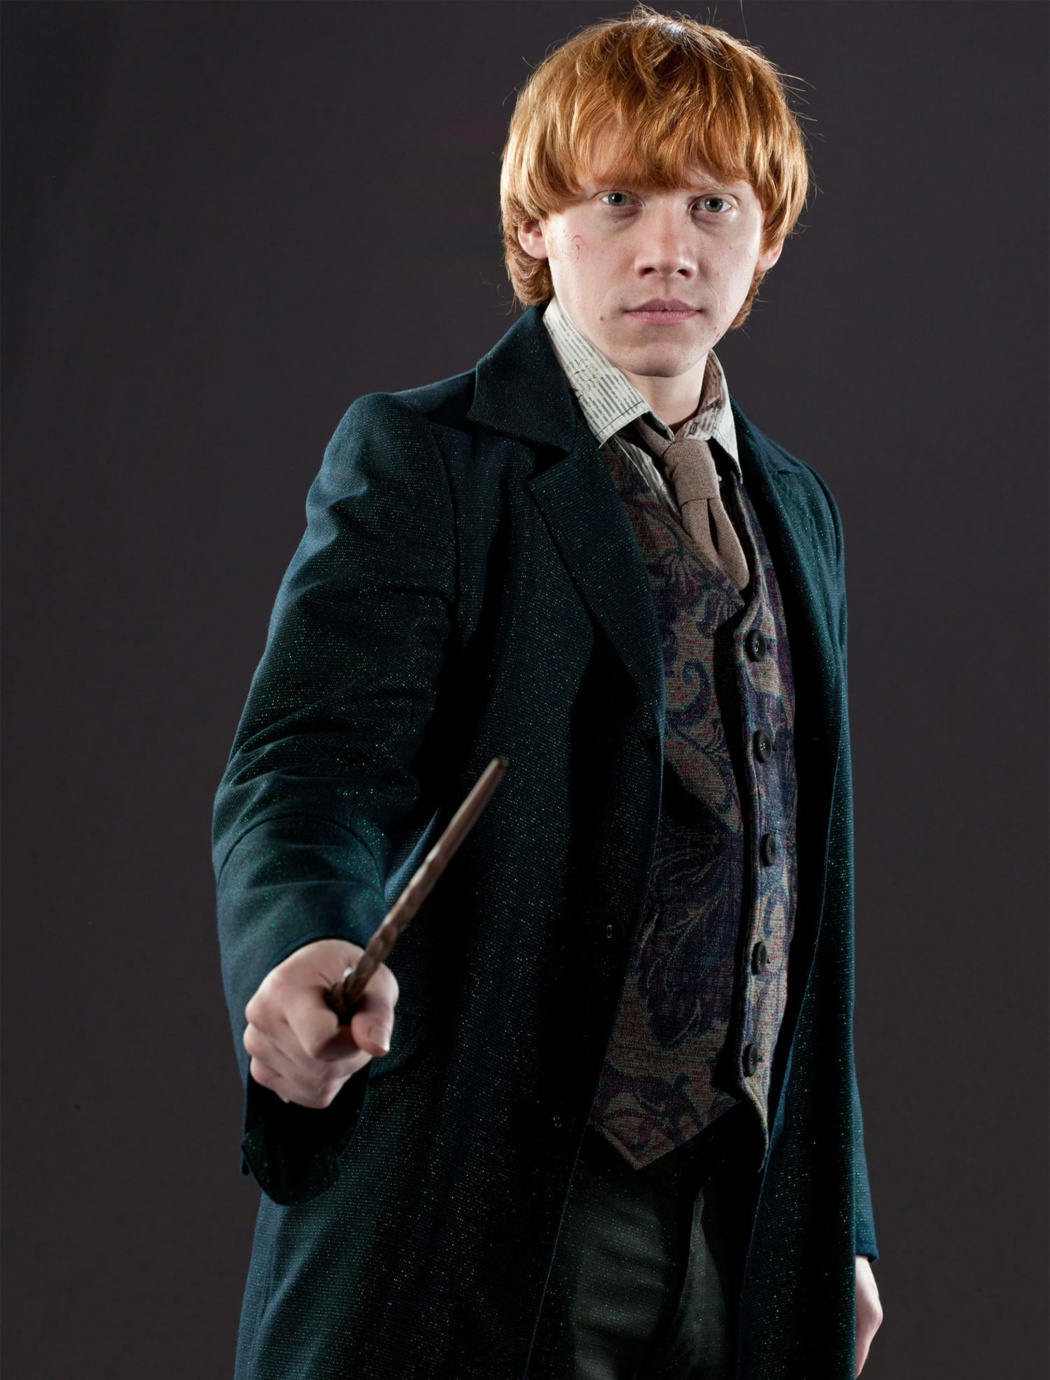 Ron Weasley' pictures.